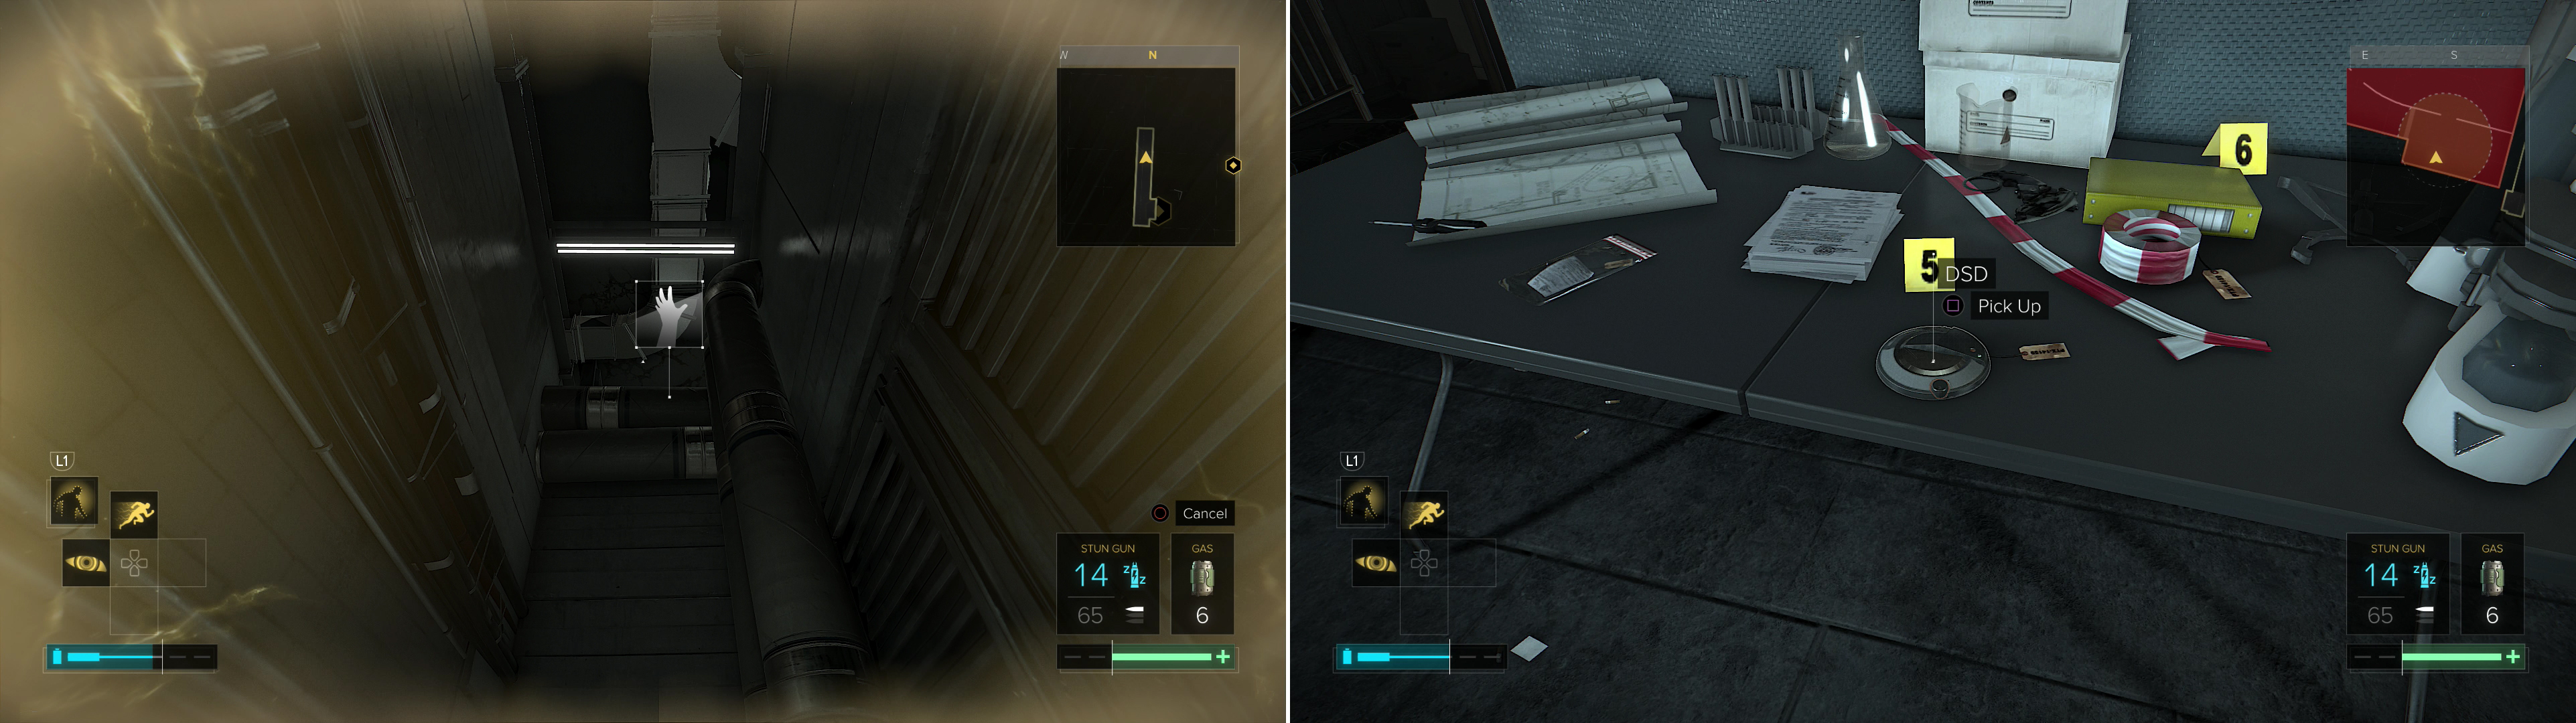 Use Icraus Dash to reach an otherwise out-of-reach ledge (left) then crawl through another vent to reach the DSD (right). Easy as pie with those two augmentations.